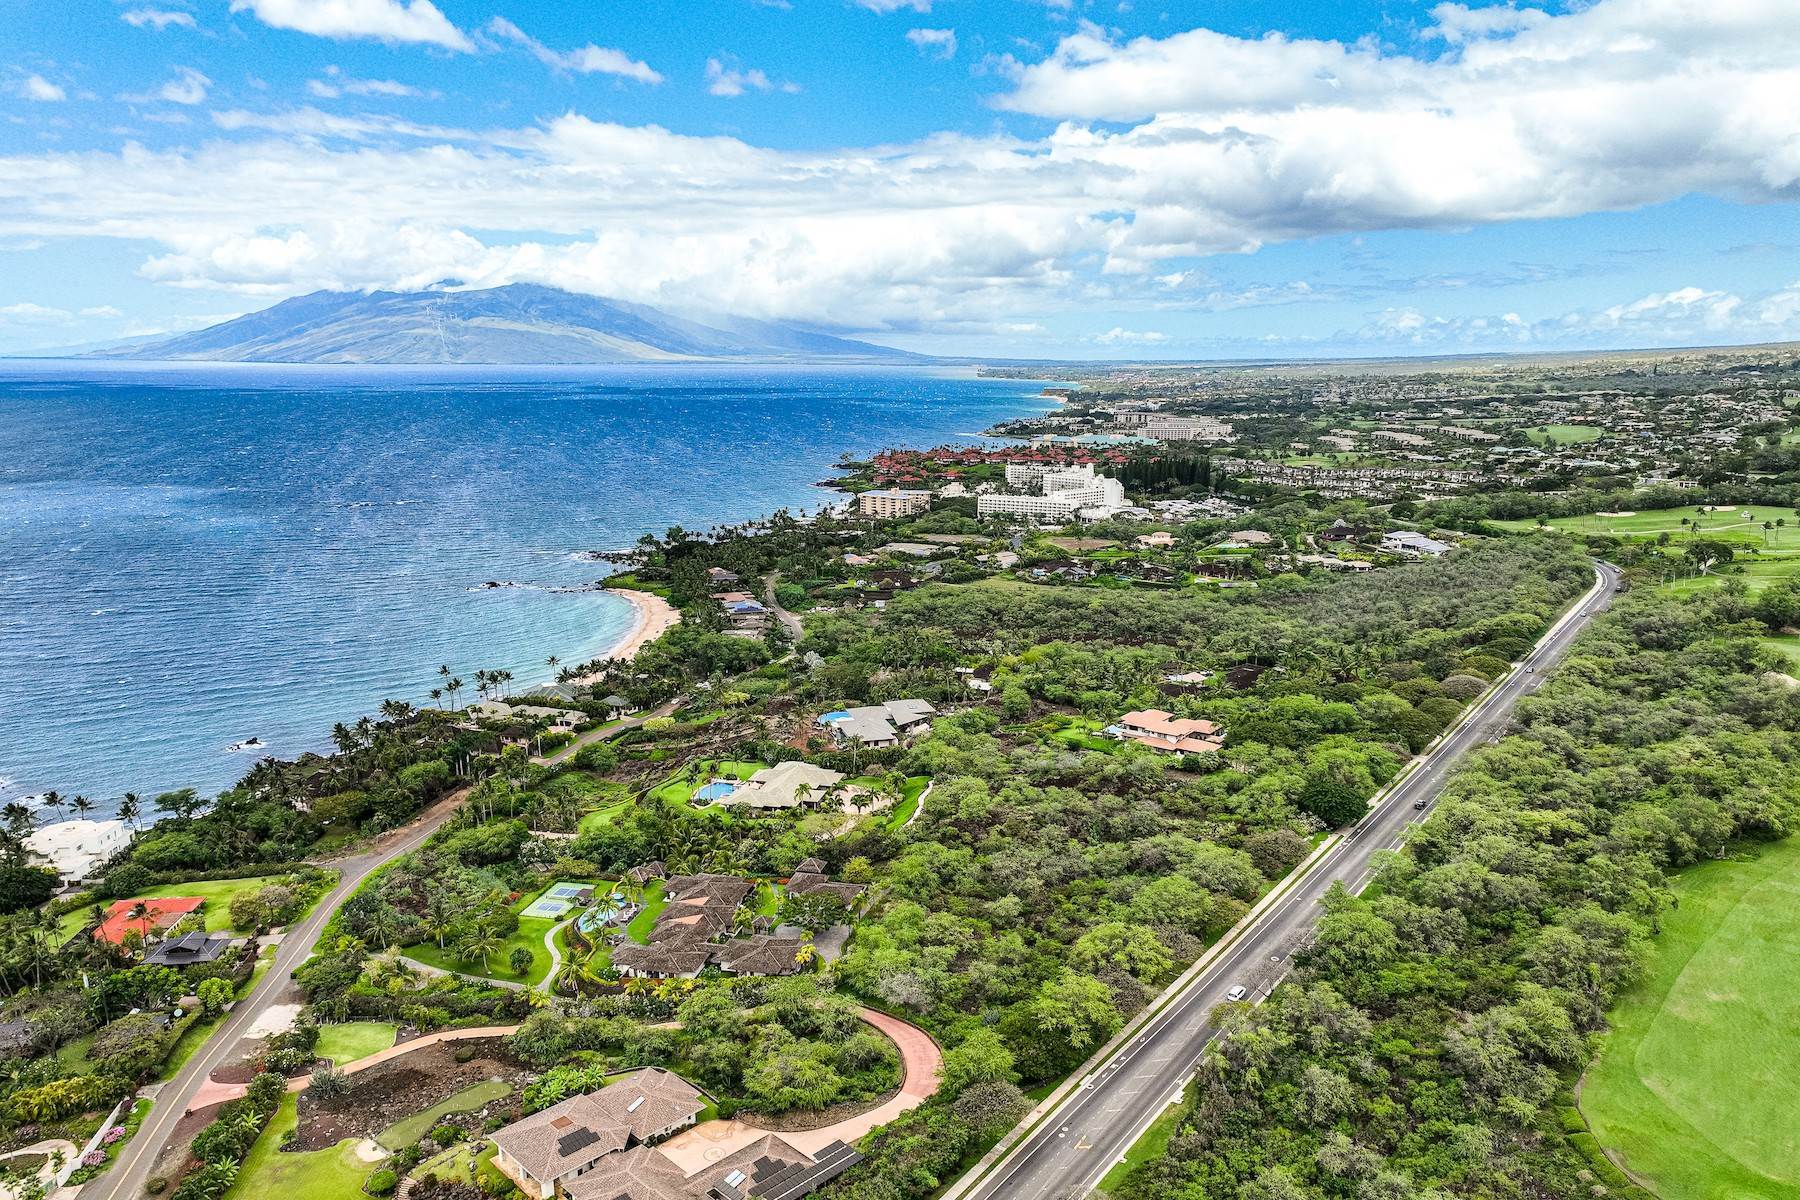 Land for Sale at Rare Opportunity to Build in Maui's Most Exclusive Area 4520 Makena Alanui Drive Kihei, Hawaii 96753 United States